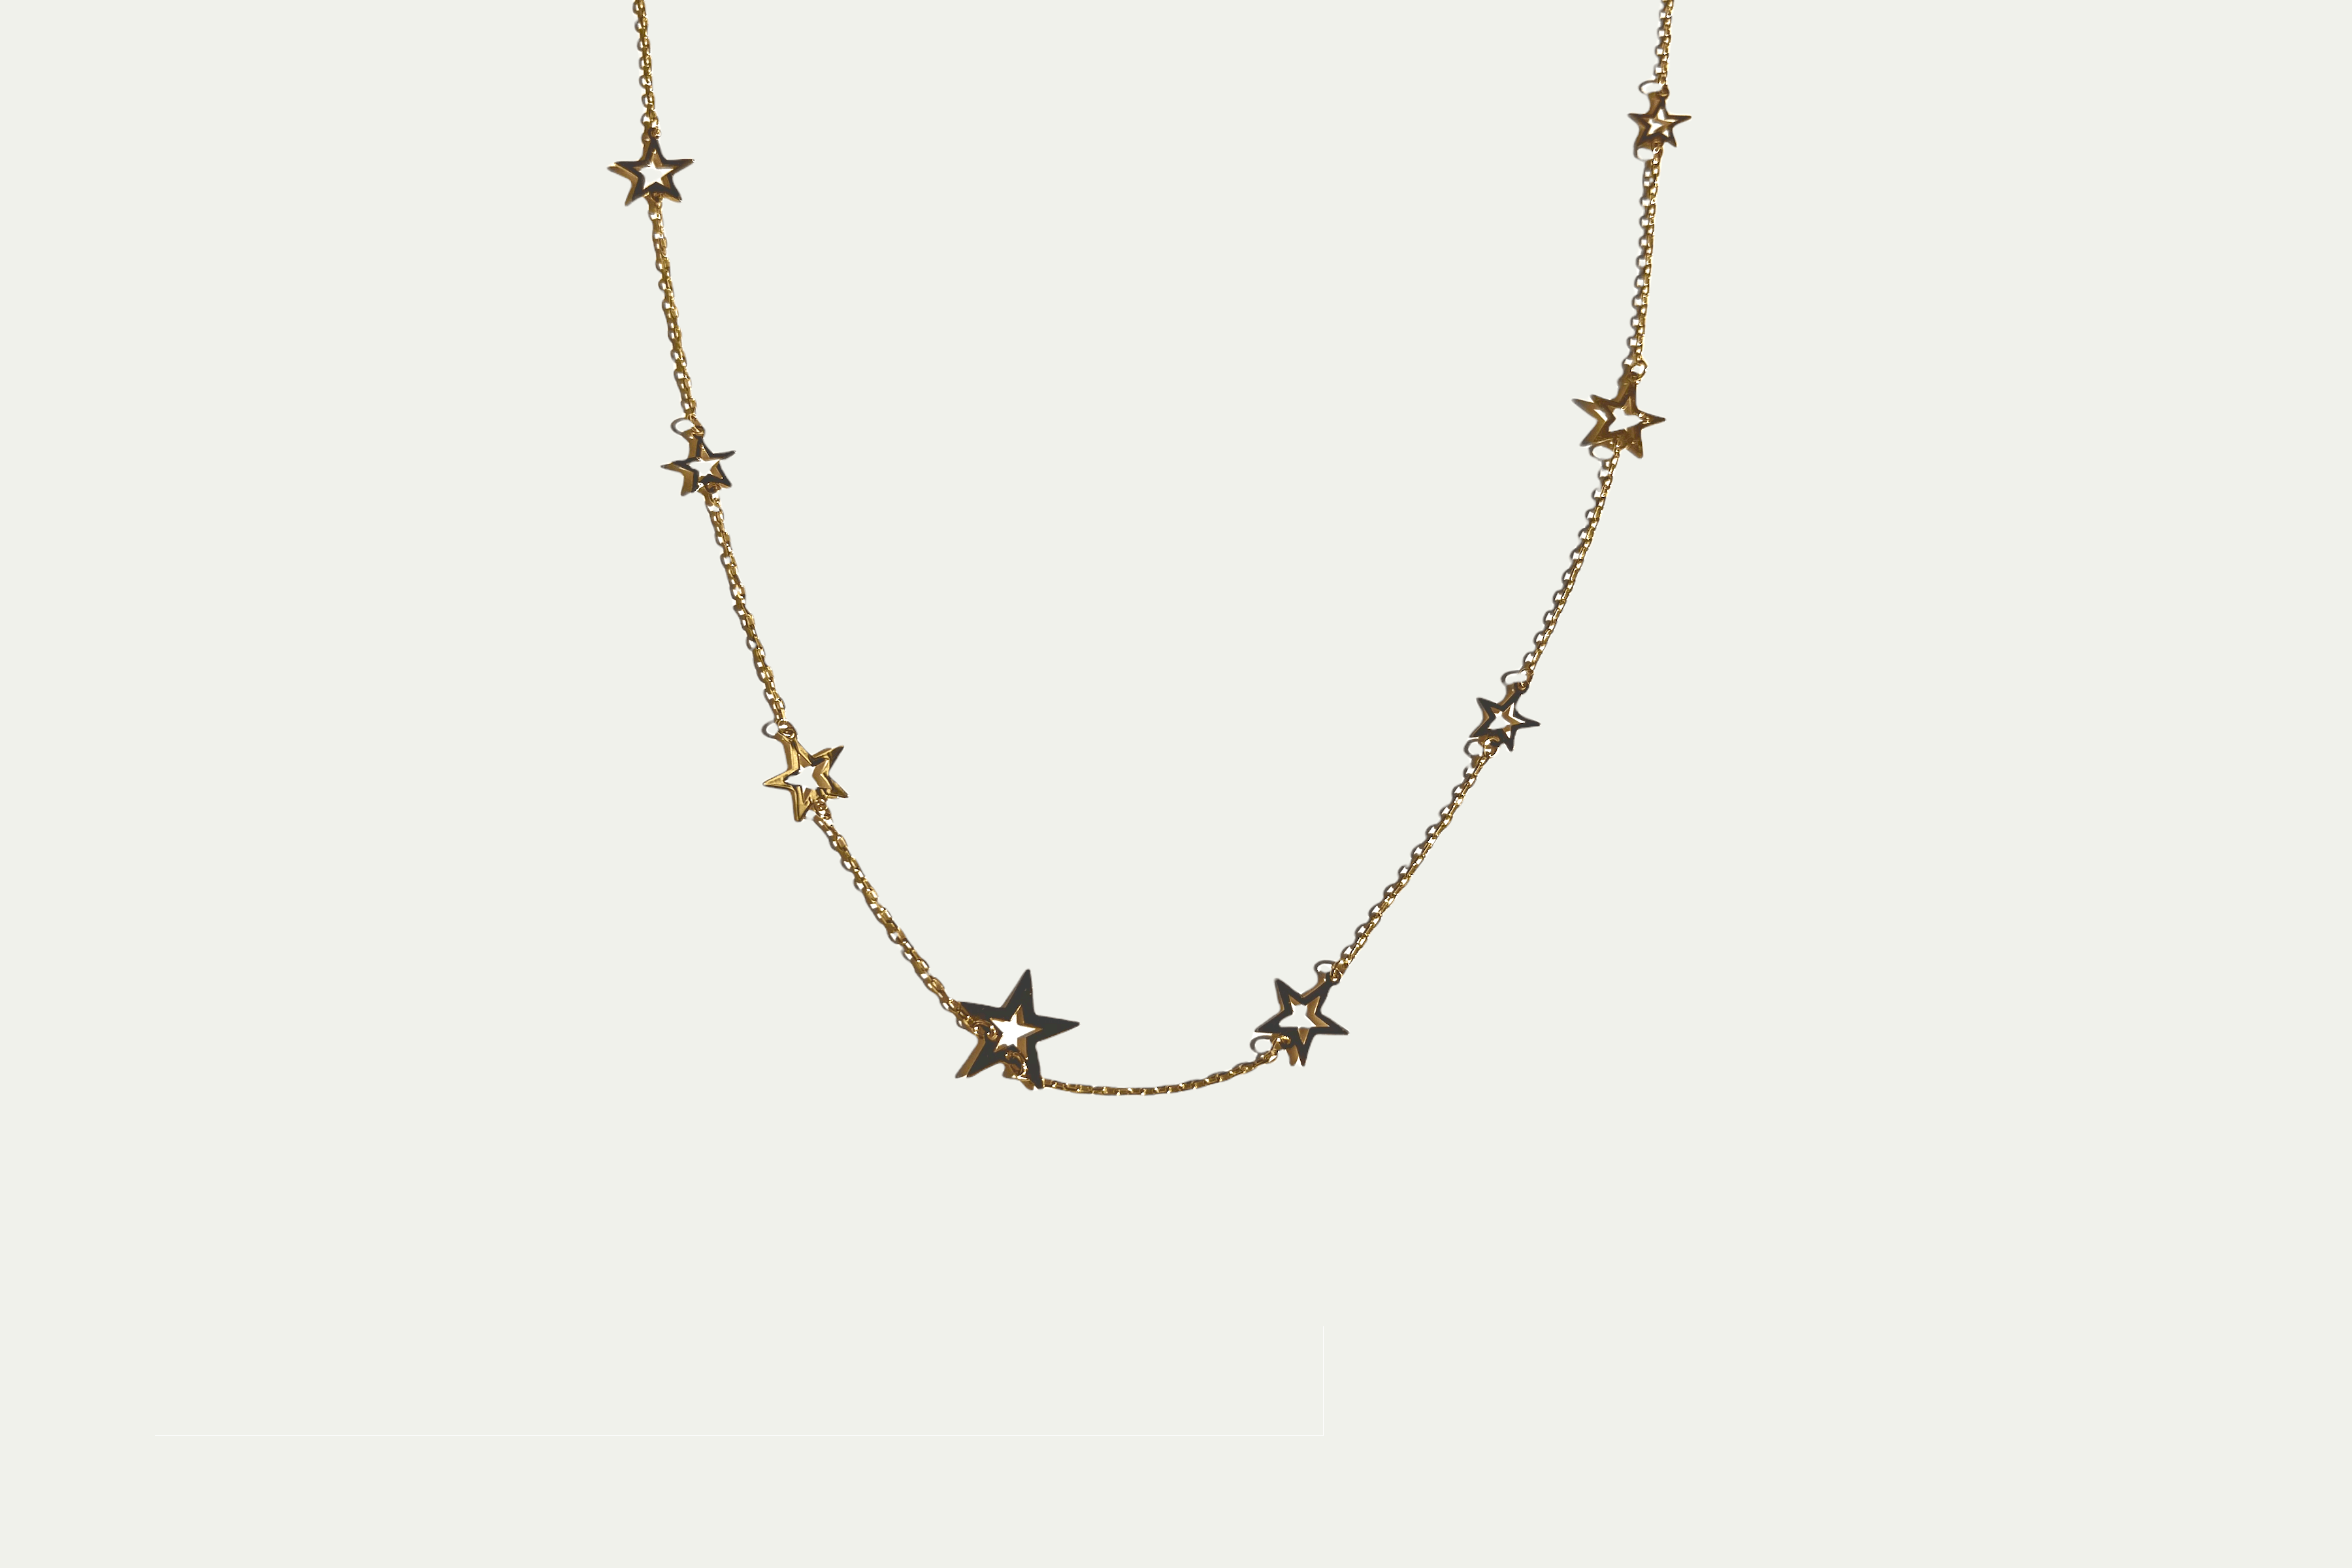 Necklace 18k yellow gold  Length 73 cm